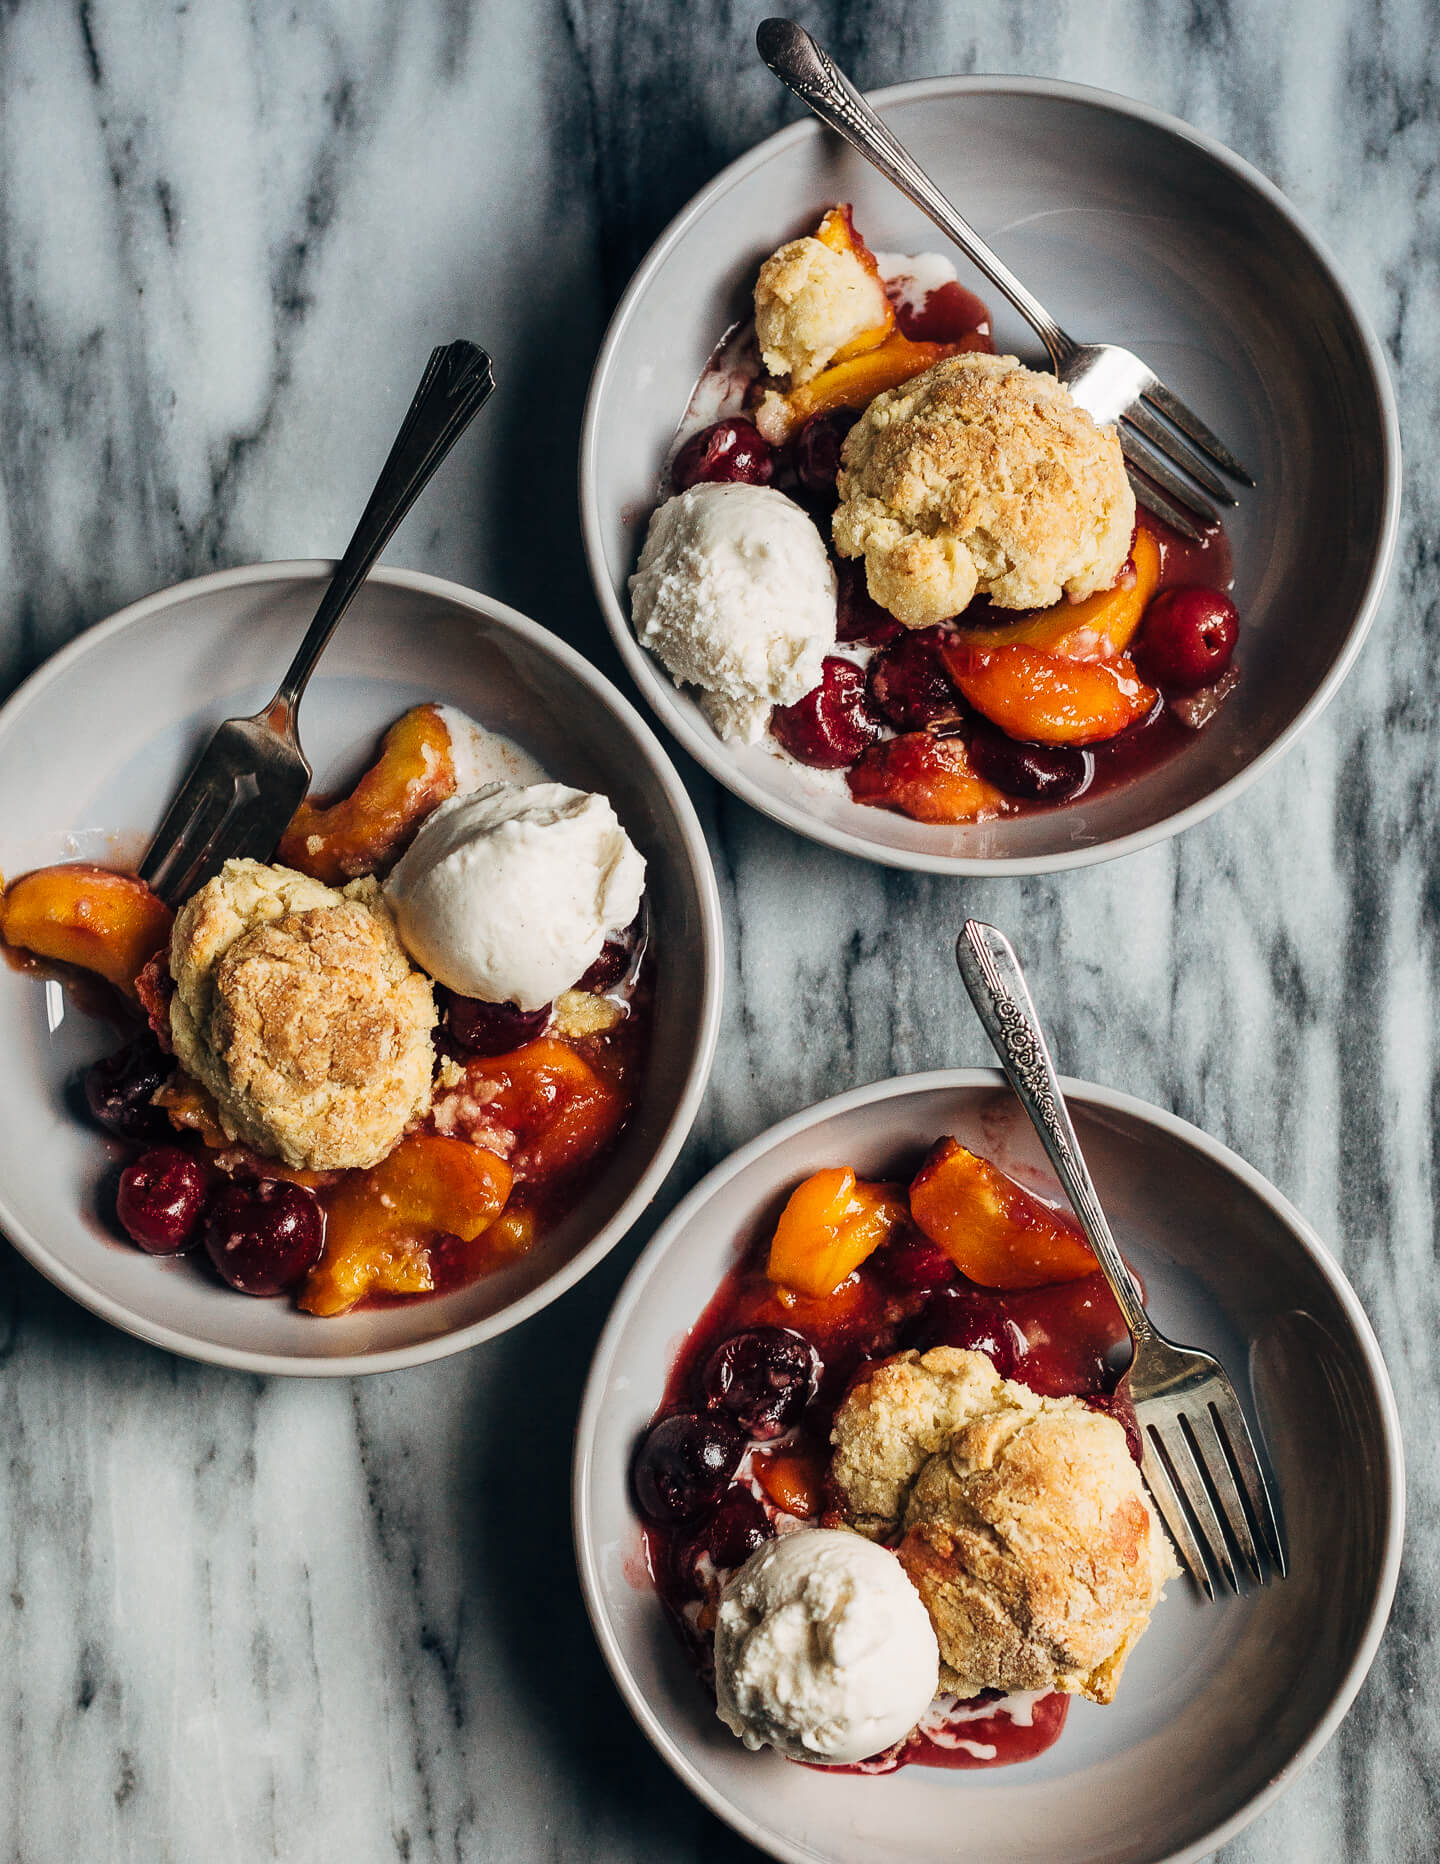 A summery cherry and peach cornmeal cobbler that pairs the sweetness of ripe summer stone fruits with a tender, faintly sweet, cornmeal biscuit topping. 